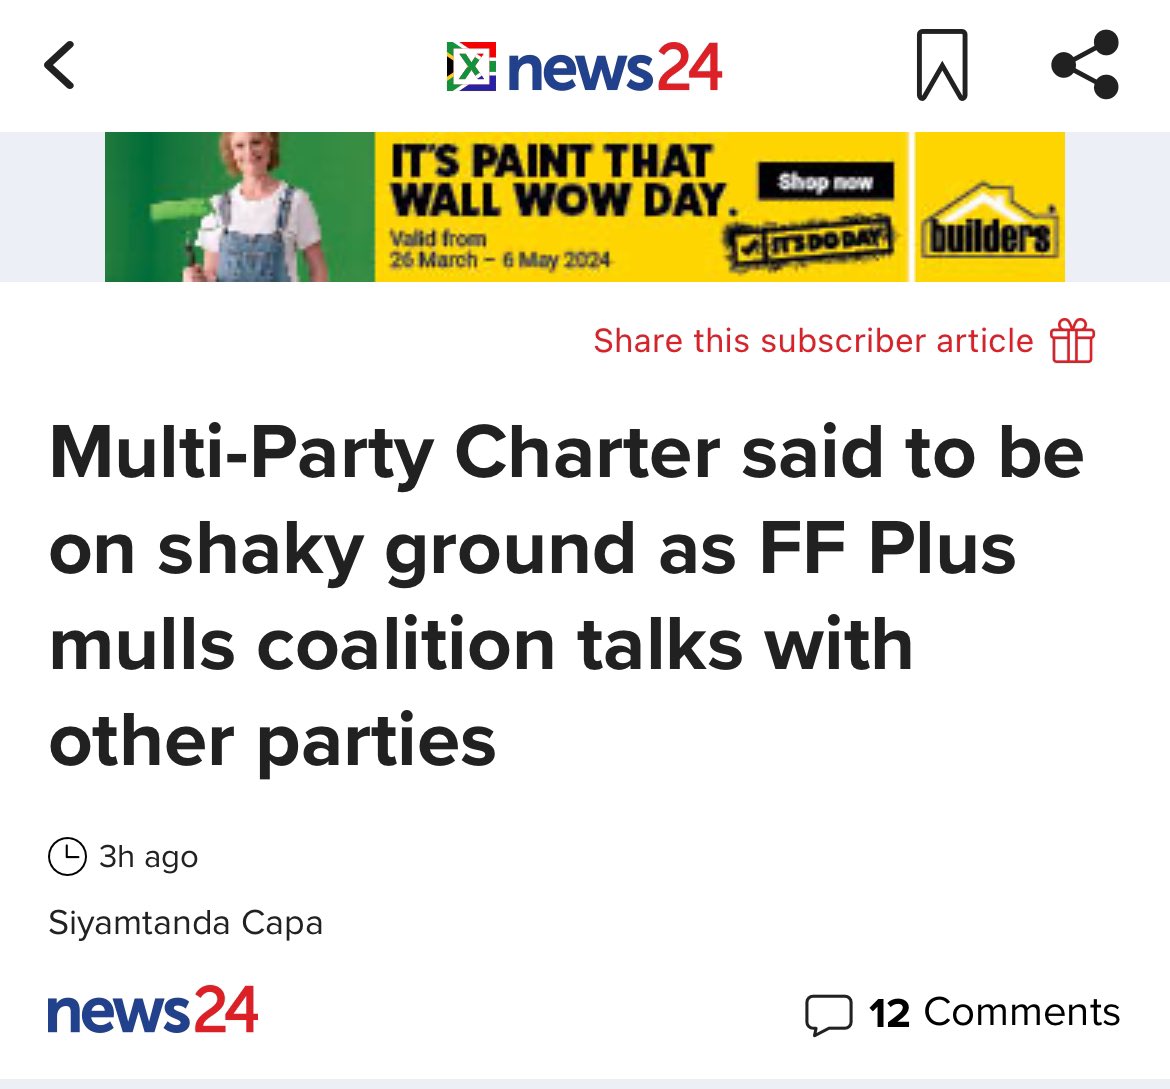 It’s interesting that the FF Plus is considering a coalition with “other parties” shortly after they voted with the ANC in eThekwini this week to spend R25 million on new vehicles for the mayor and councillors. I wonder who those “other parties” could be?